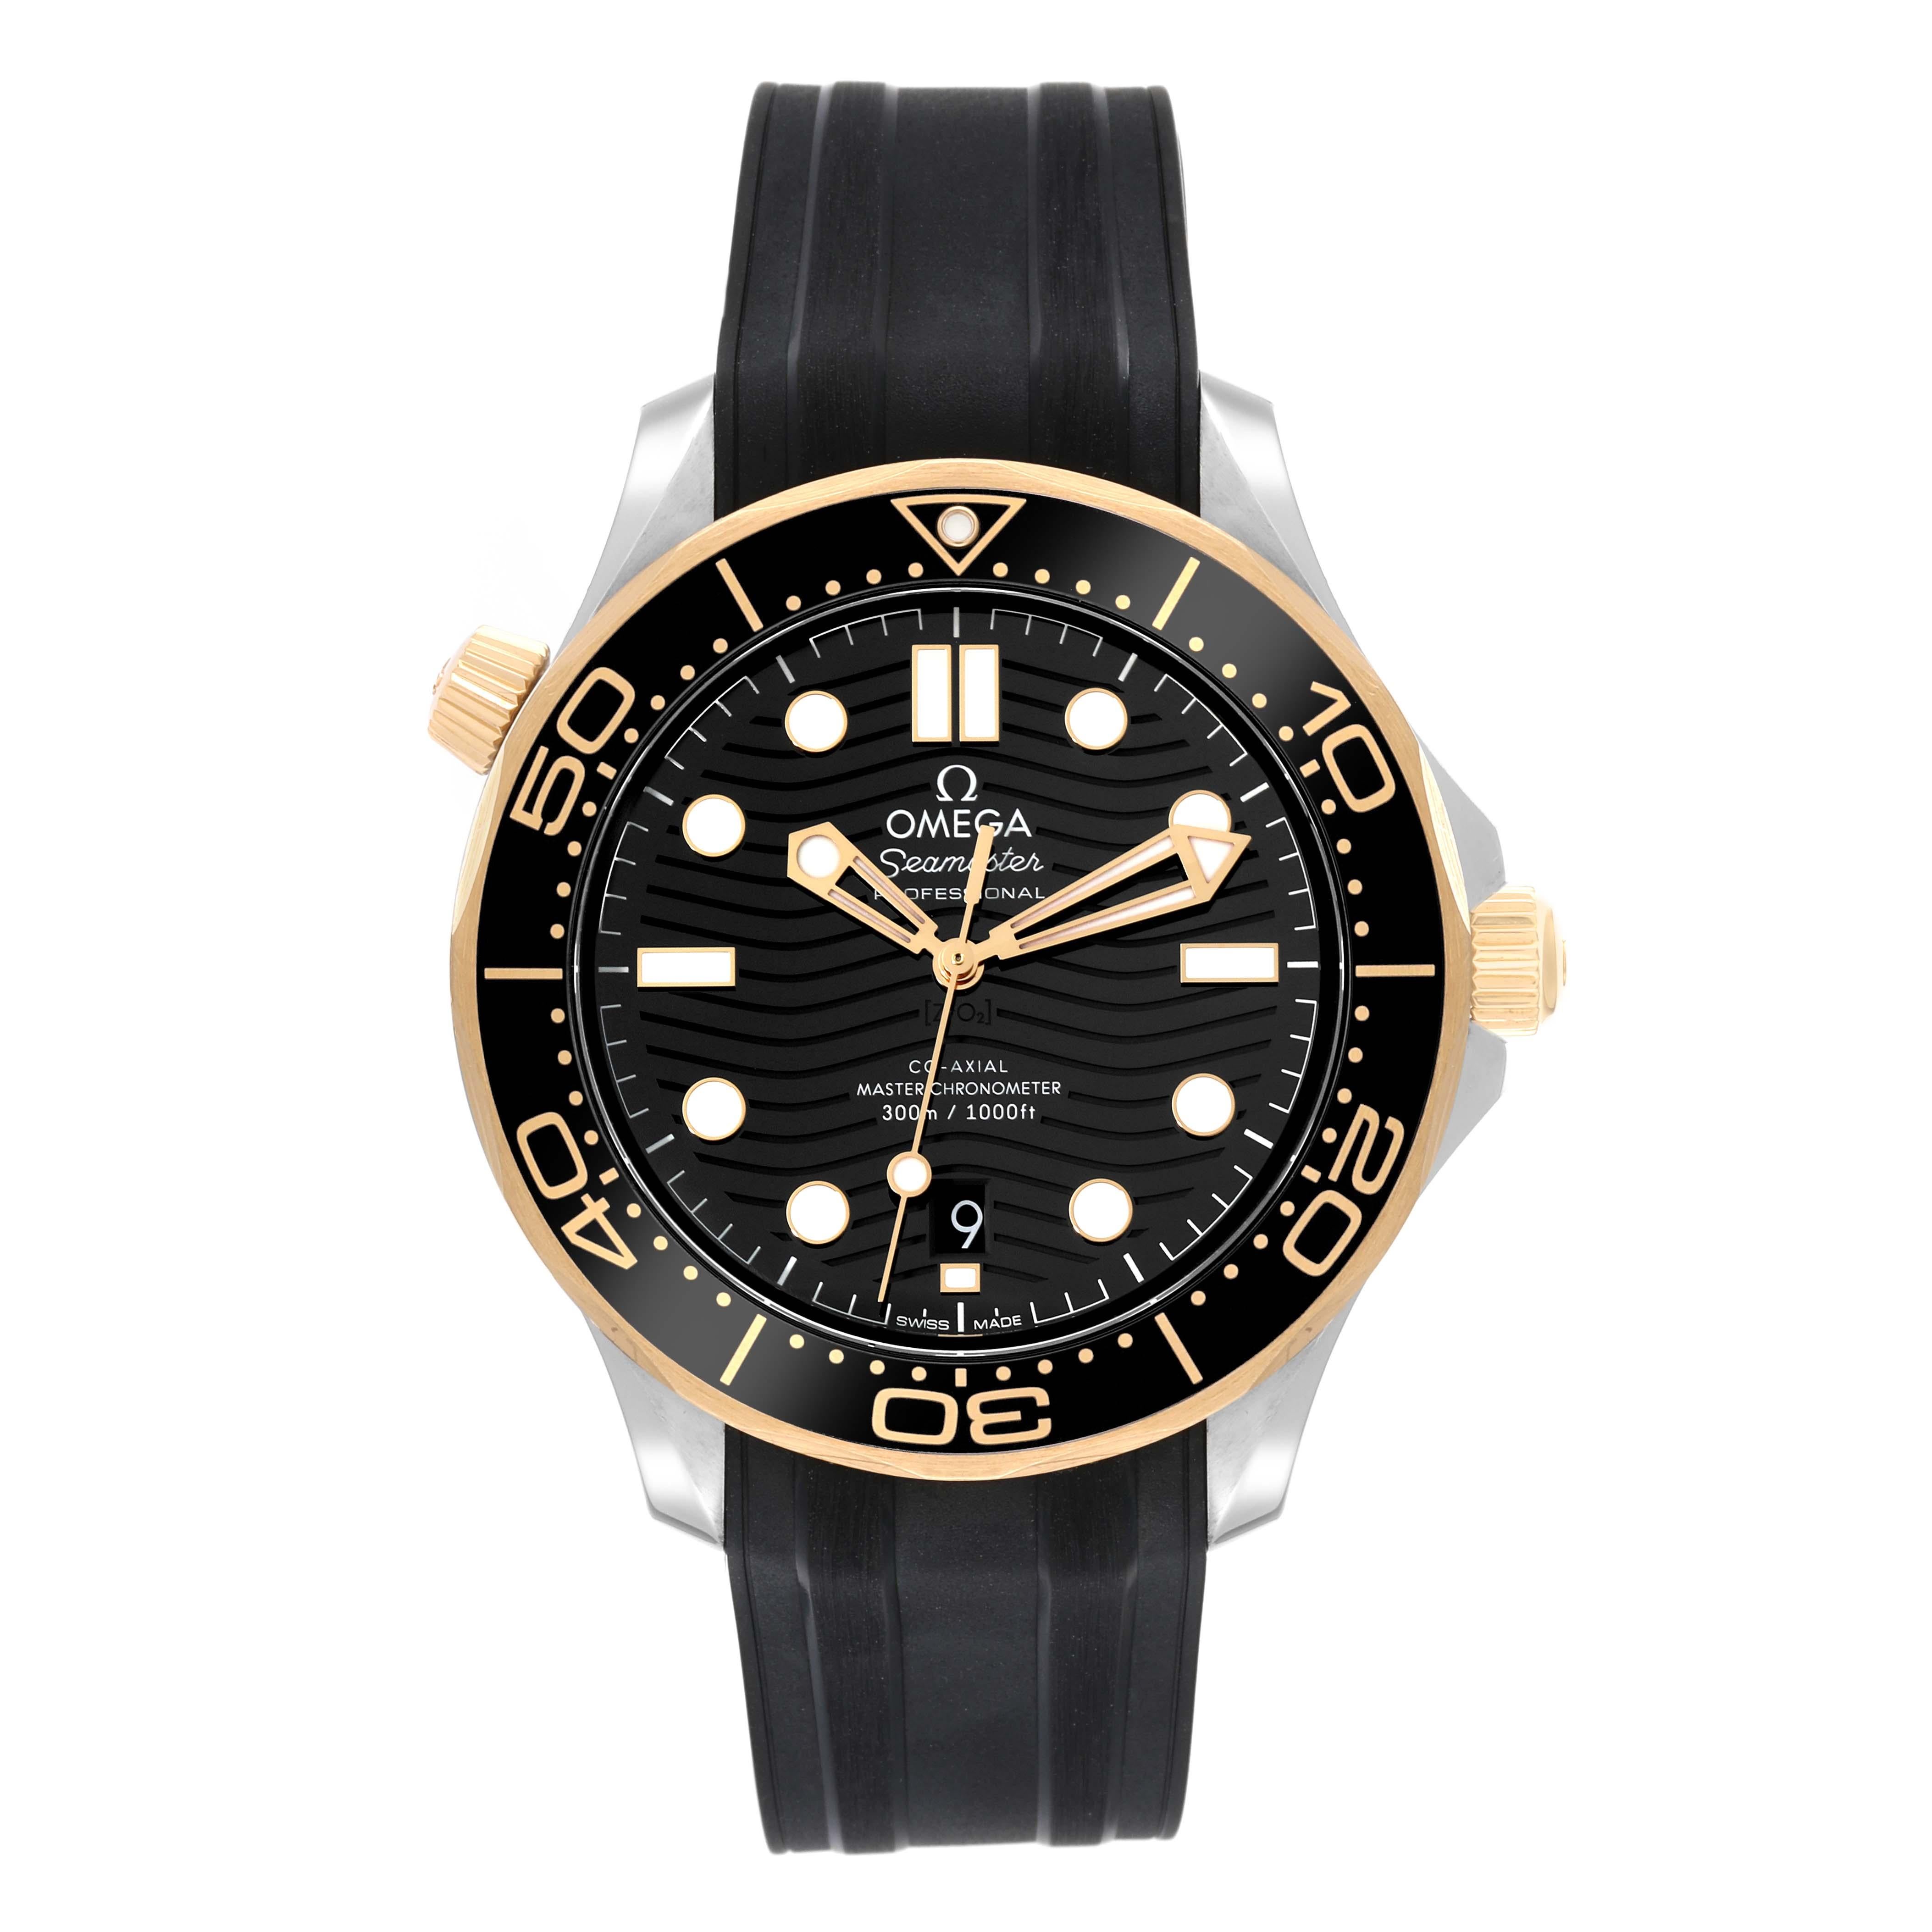 Omega Seamaster 300M Steel Yellow Gold Mens Watch 210.22.42.20.01.001 Box Card. Automatic self-winding chronometer, Co-Axial Escapement movement. Certified Master Chronometer, approved by METAS, resistant to magnetic fields reaching 15,000 gauss.